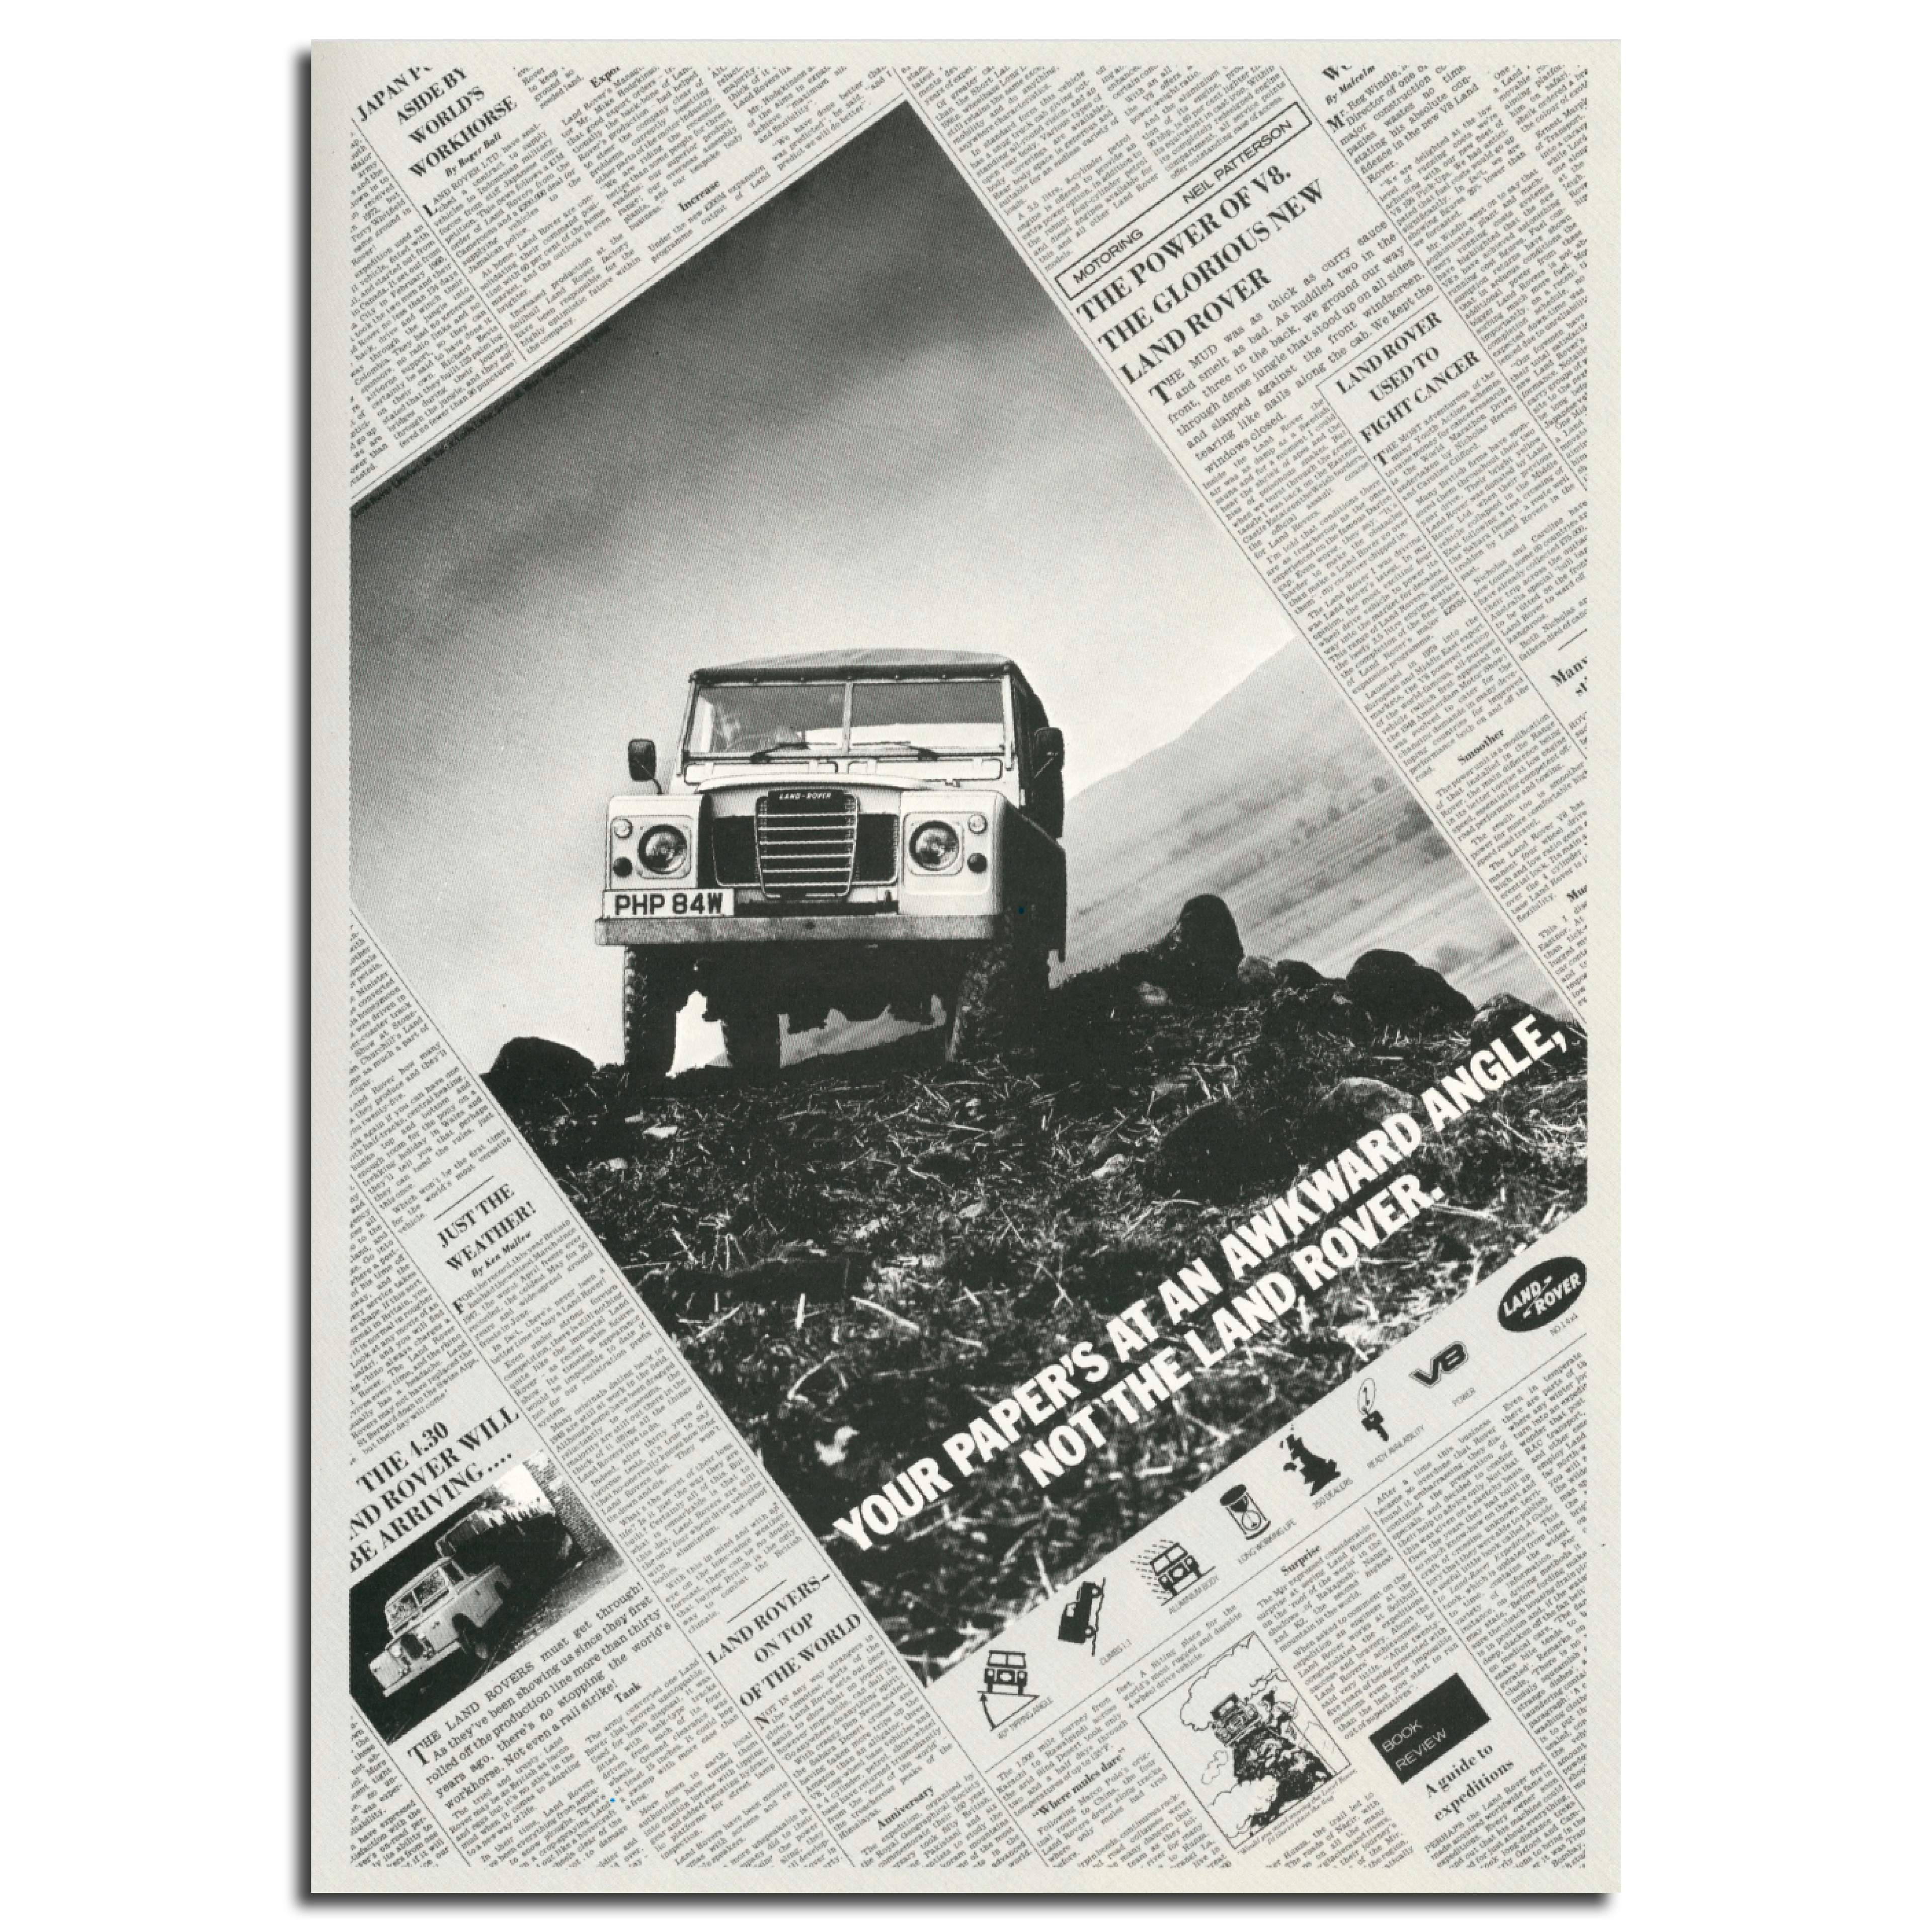 Black and white photo of a Land Rover at an angle in a newspaper. Award-winning press ad and copywriting for Land Rover.